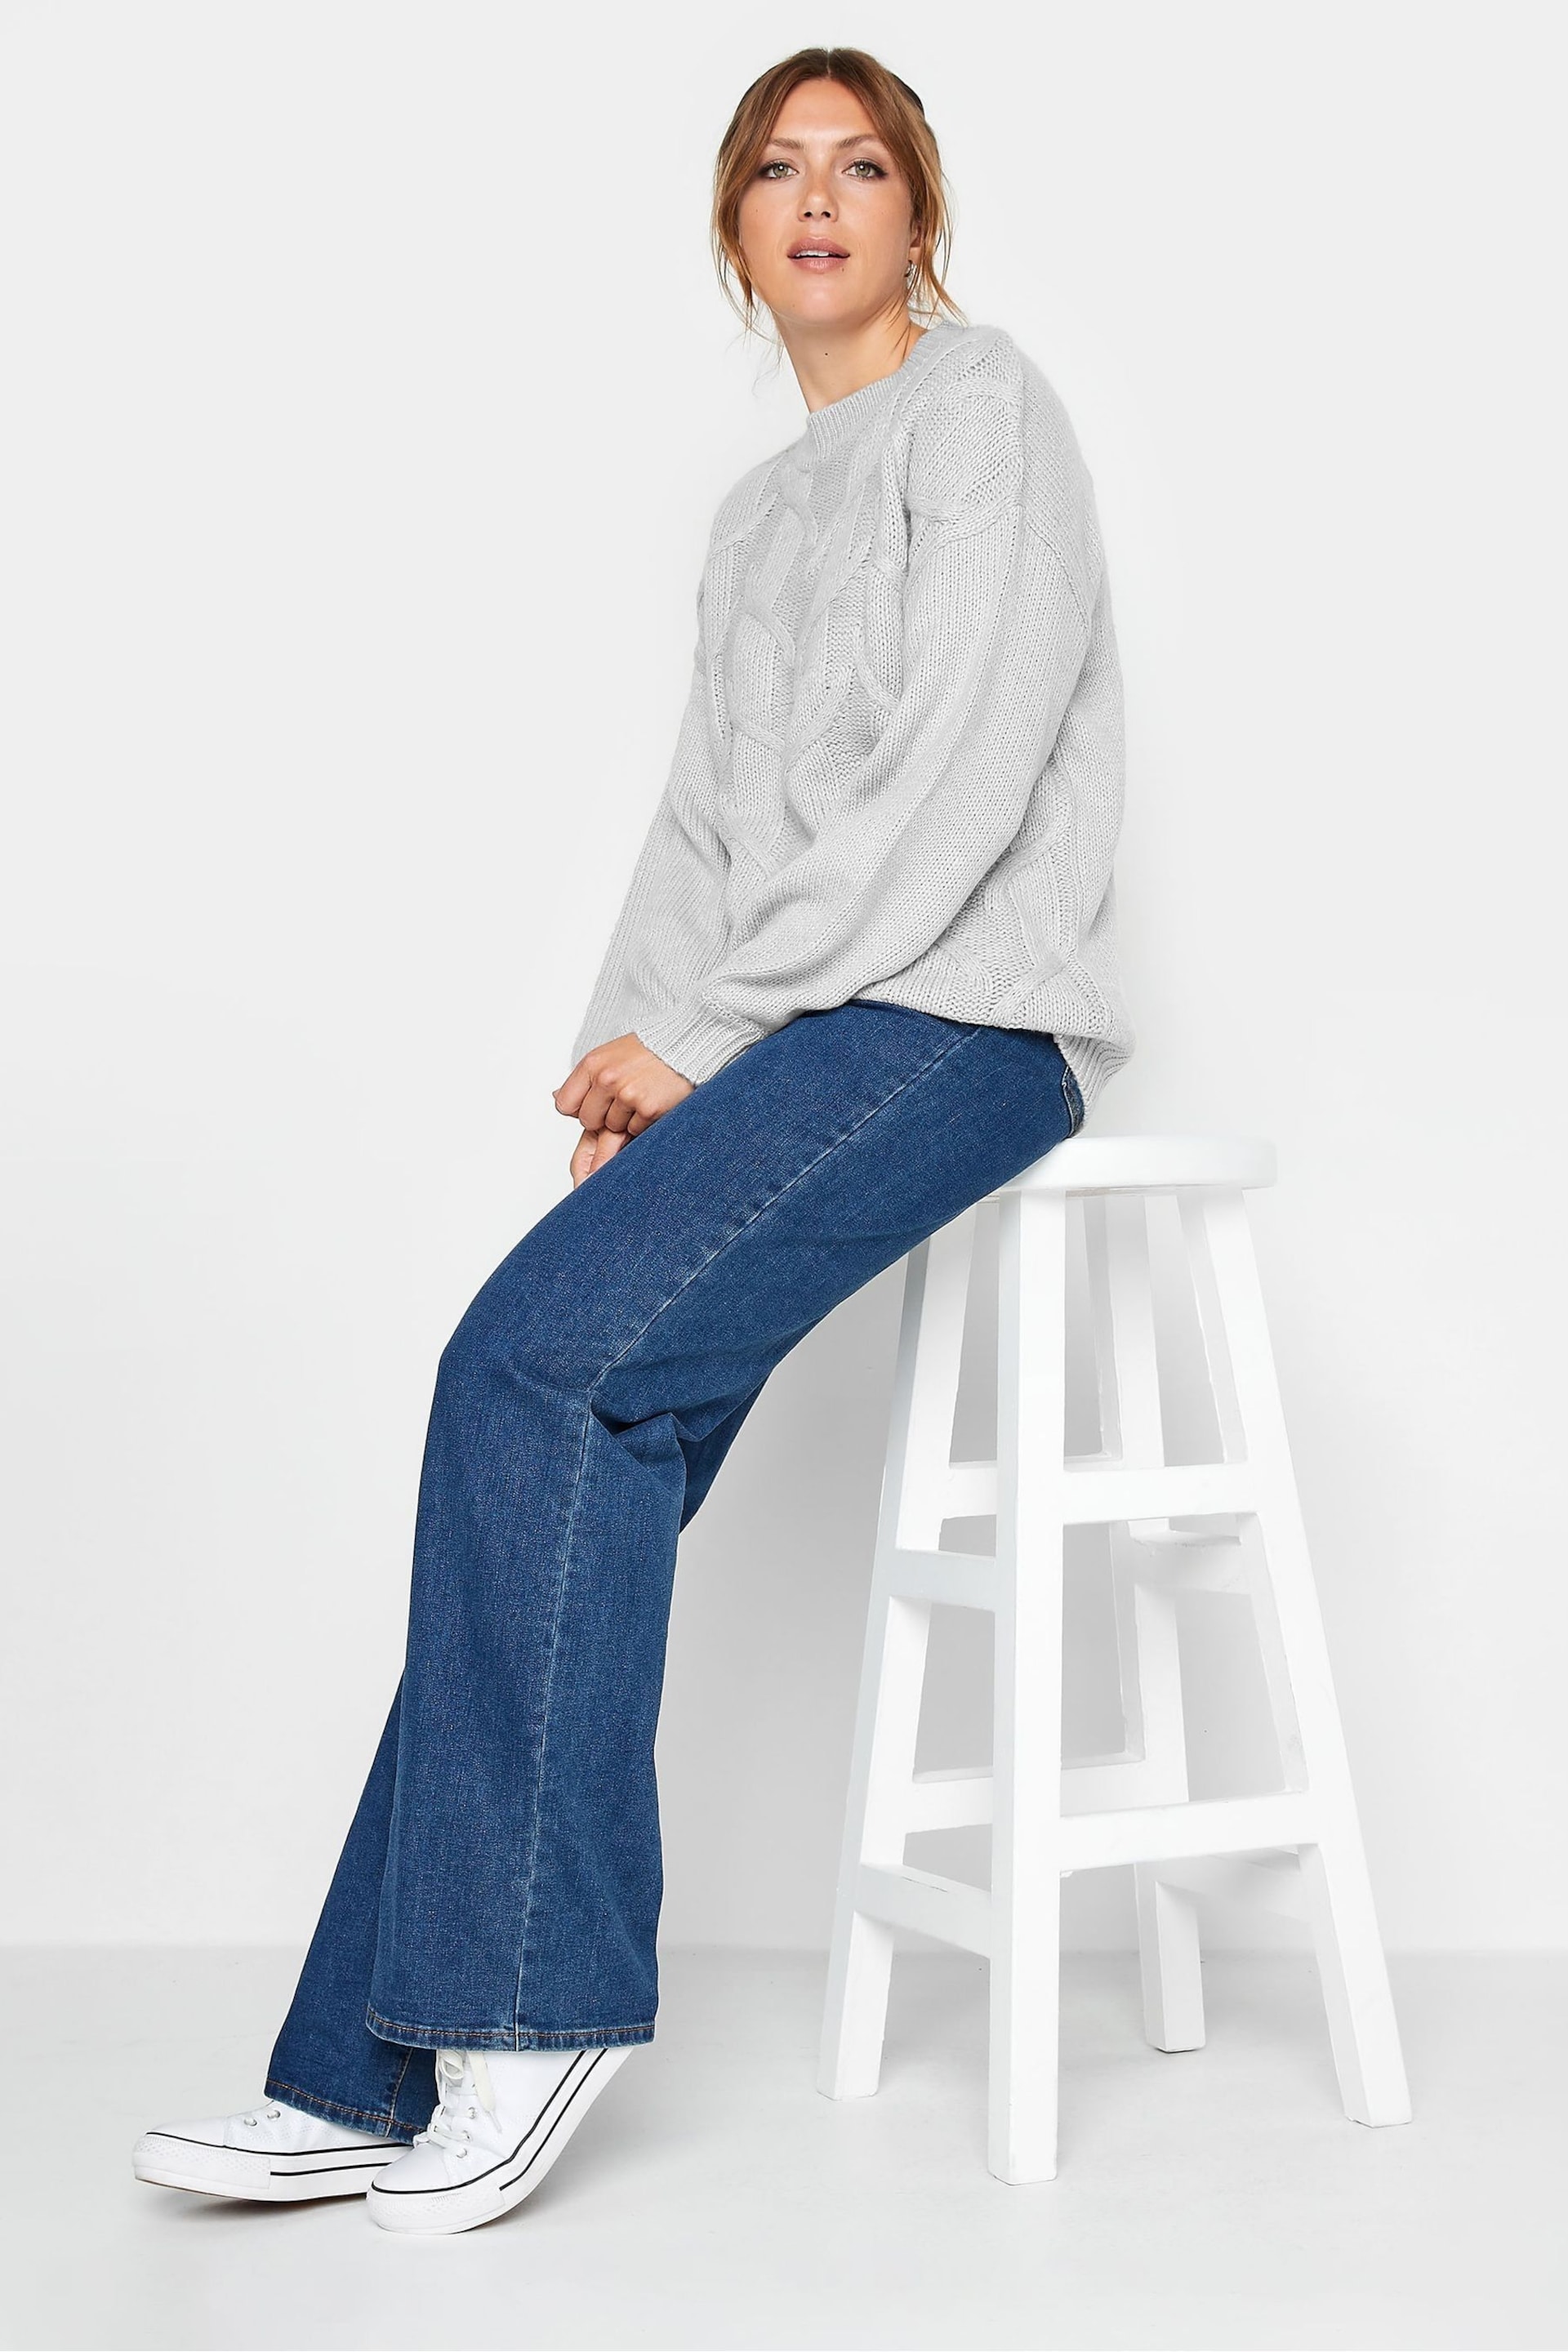 Long Tall Sally Grey Cable Knit Jumper - Image 4 of 4